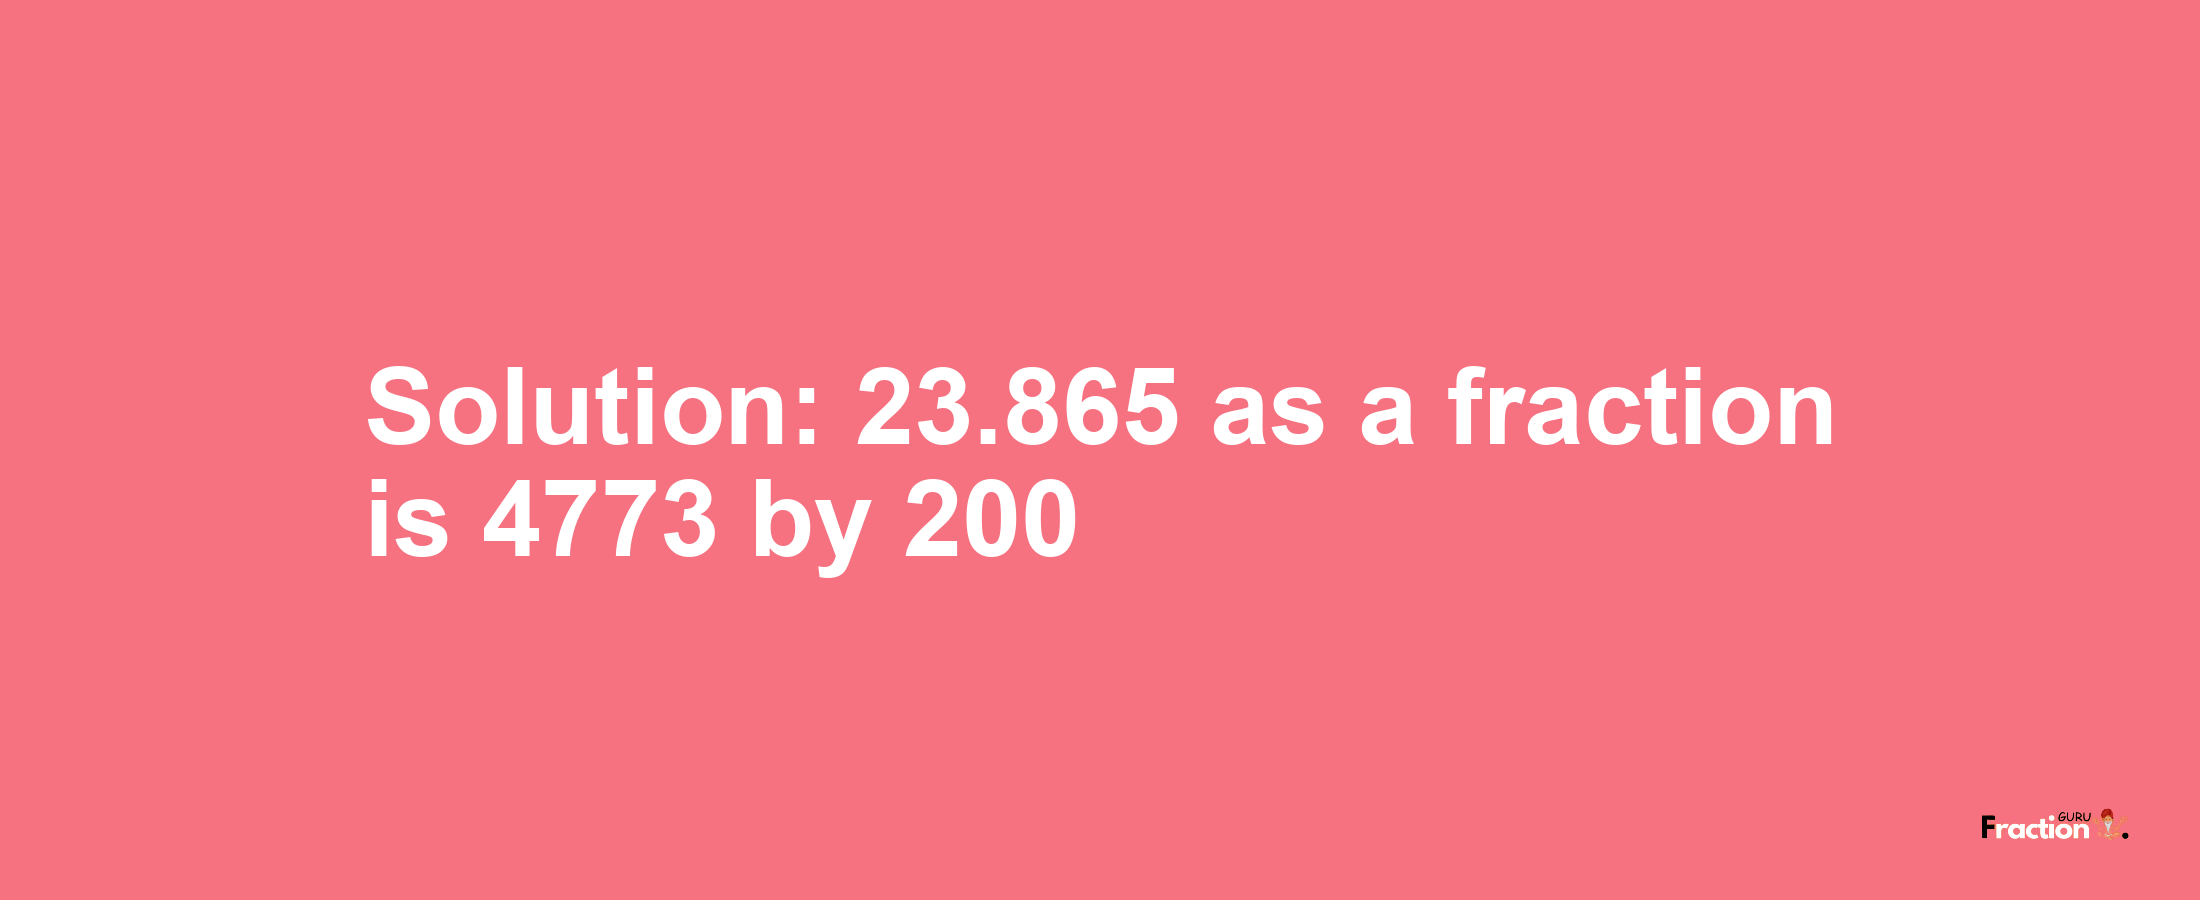 Solution:23.865 as a fraction is 4773/200